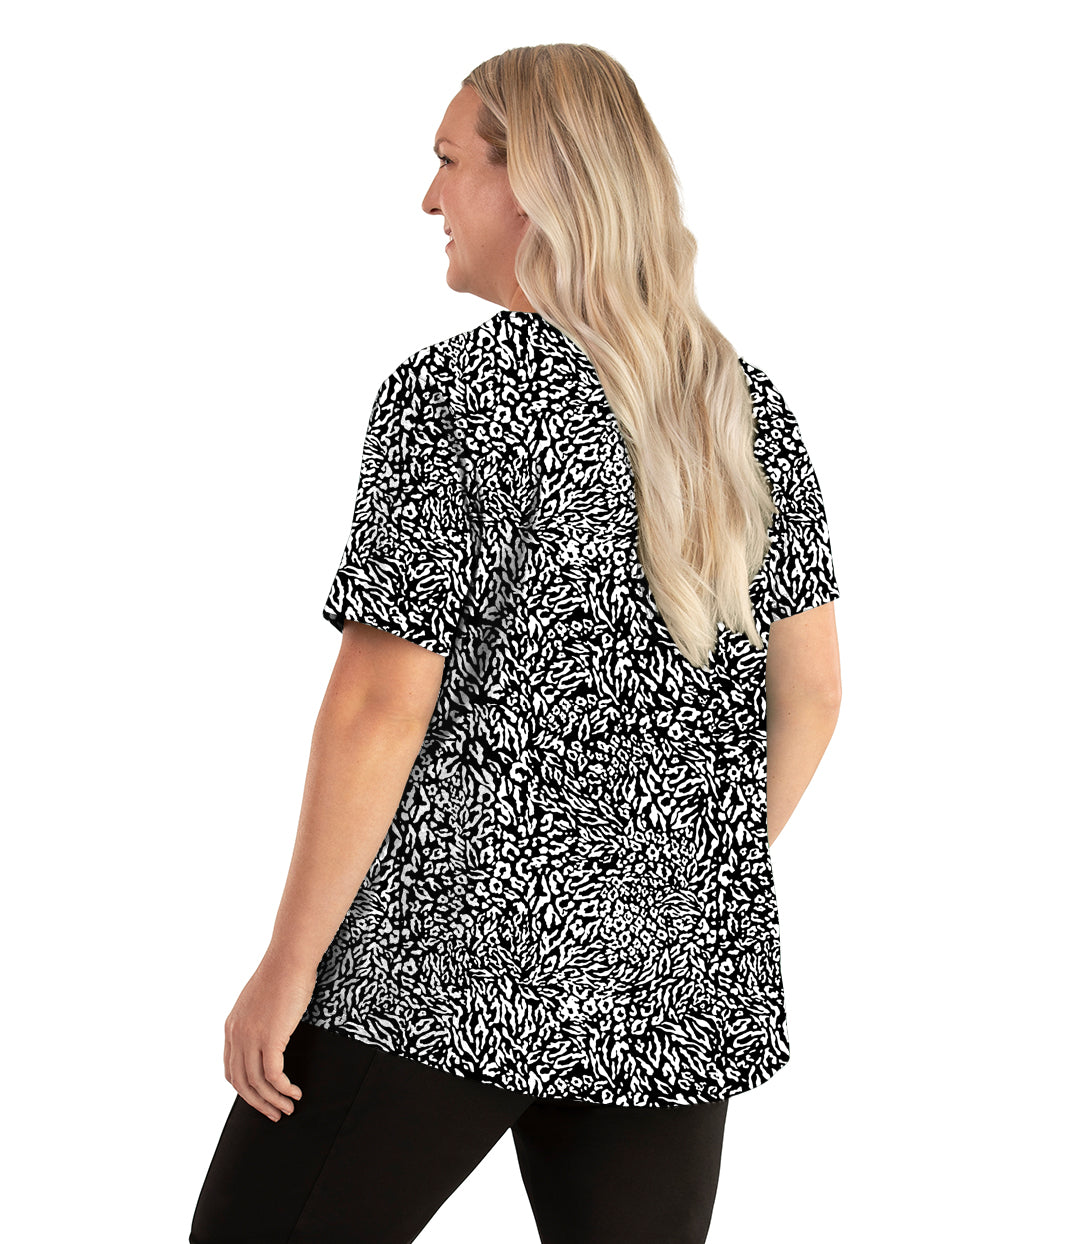 Plus size woman, facing back left, wearing JunoActive plus size Stretch Naturals Lite Short Sleeve Scoop Neck Top in the color Wild Print. She is wearing JunoActive Plus Size Leggings in the color black.